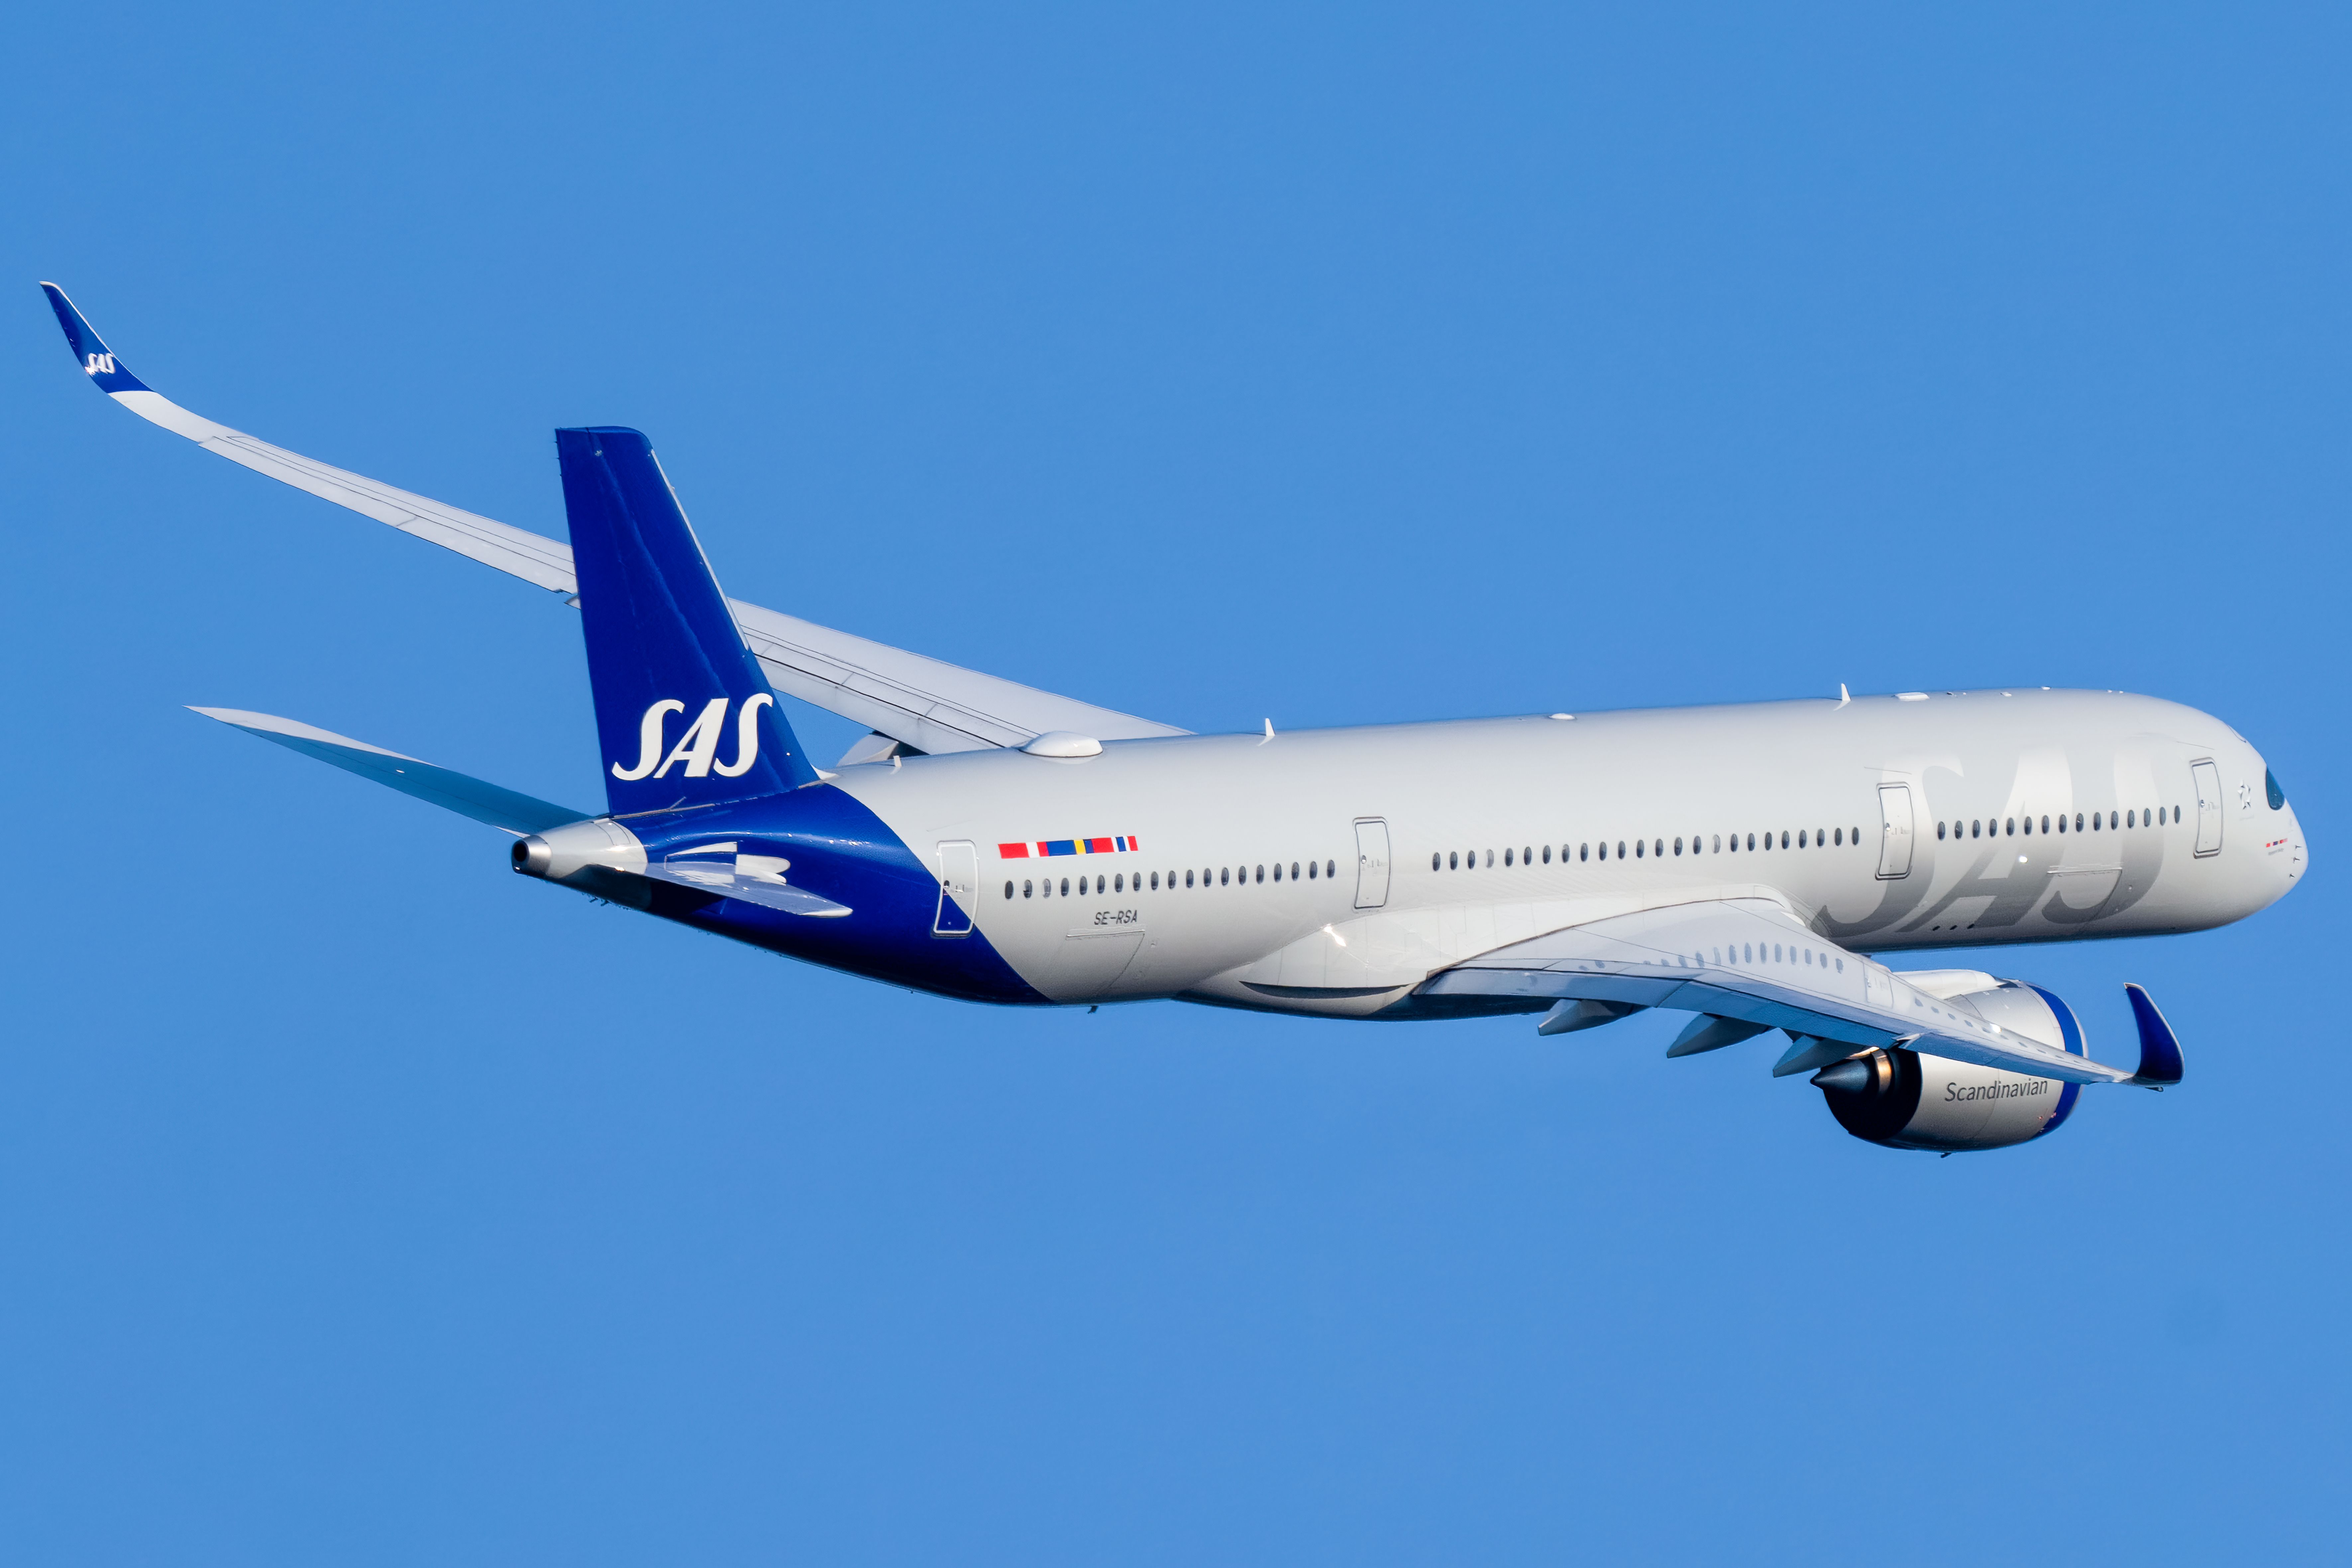 SAS Airbus A350-900 taking off from Newark Liberty International Airport.